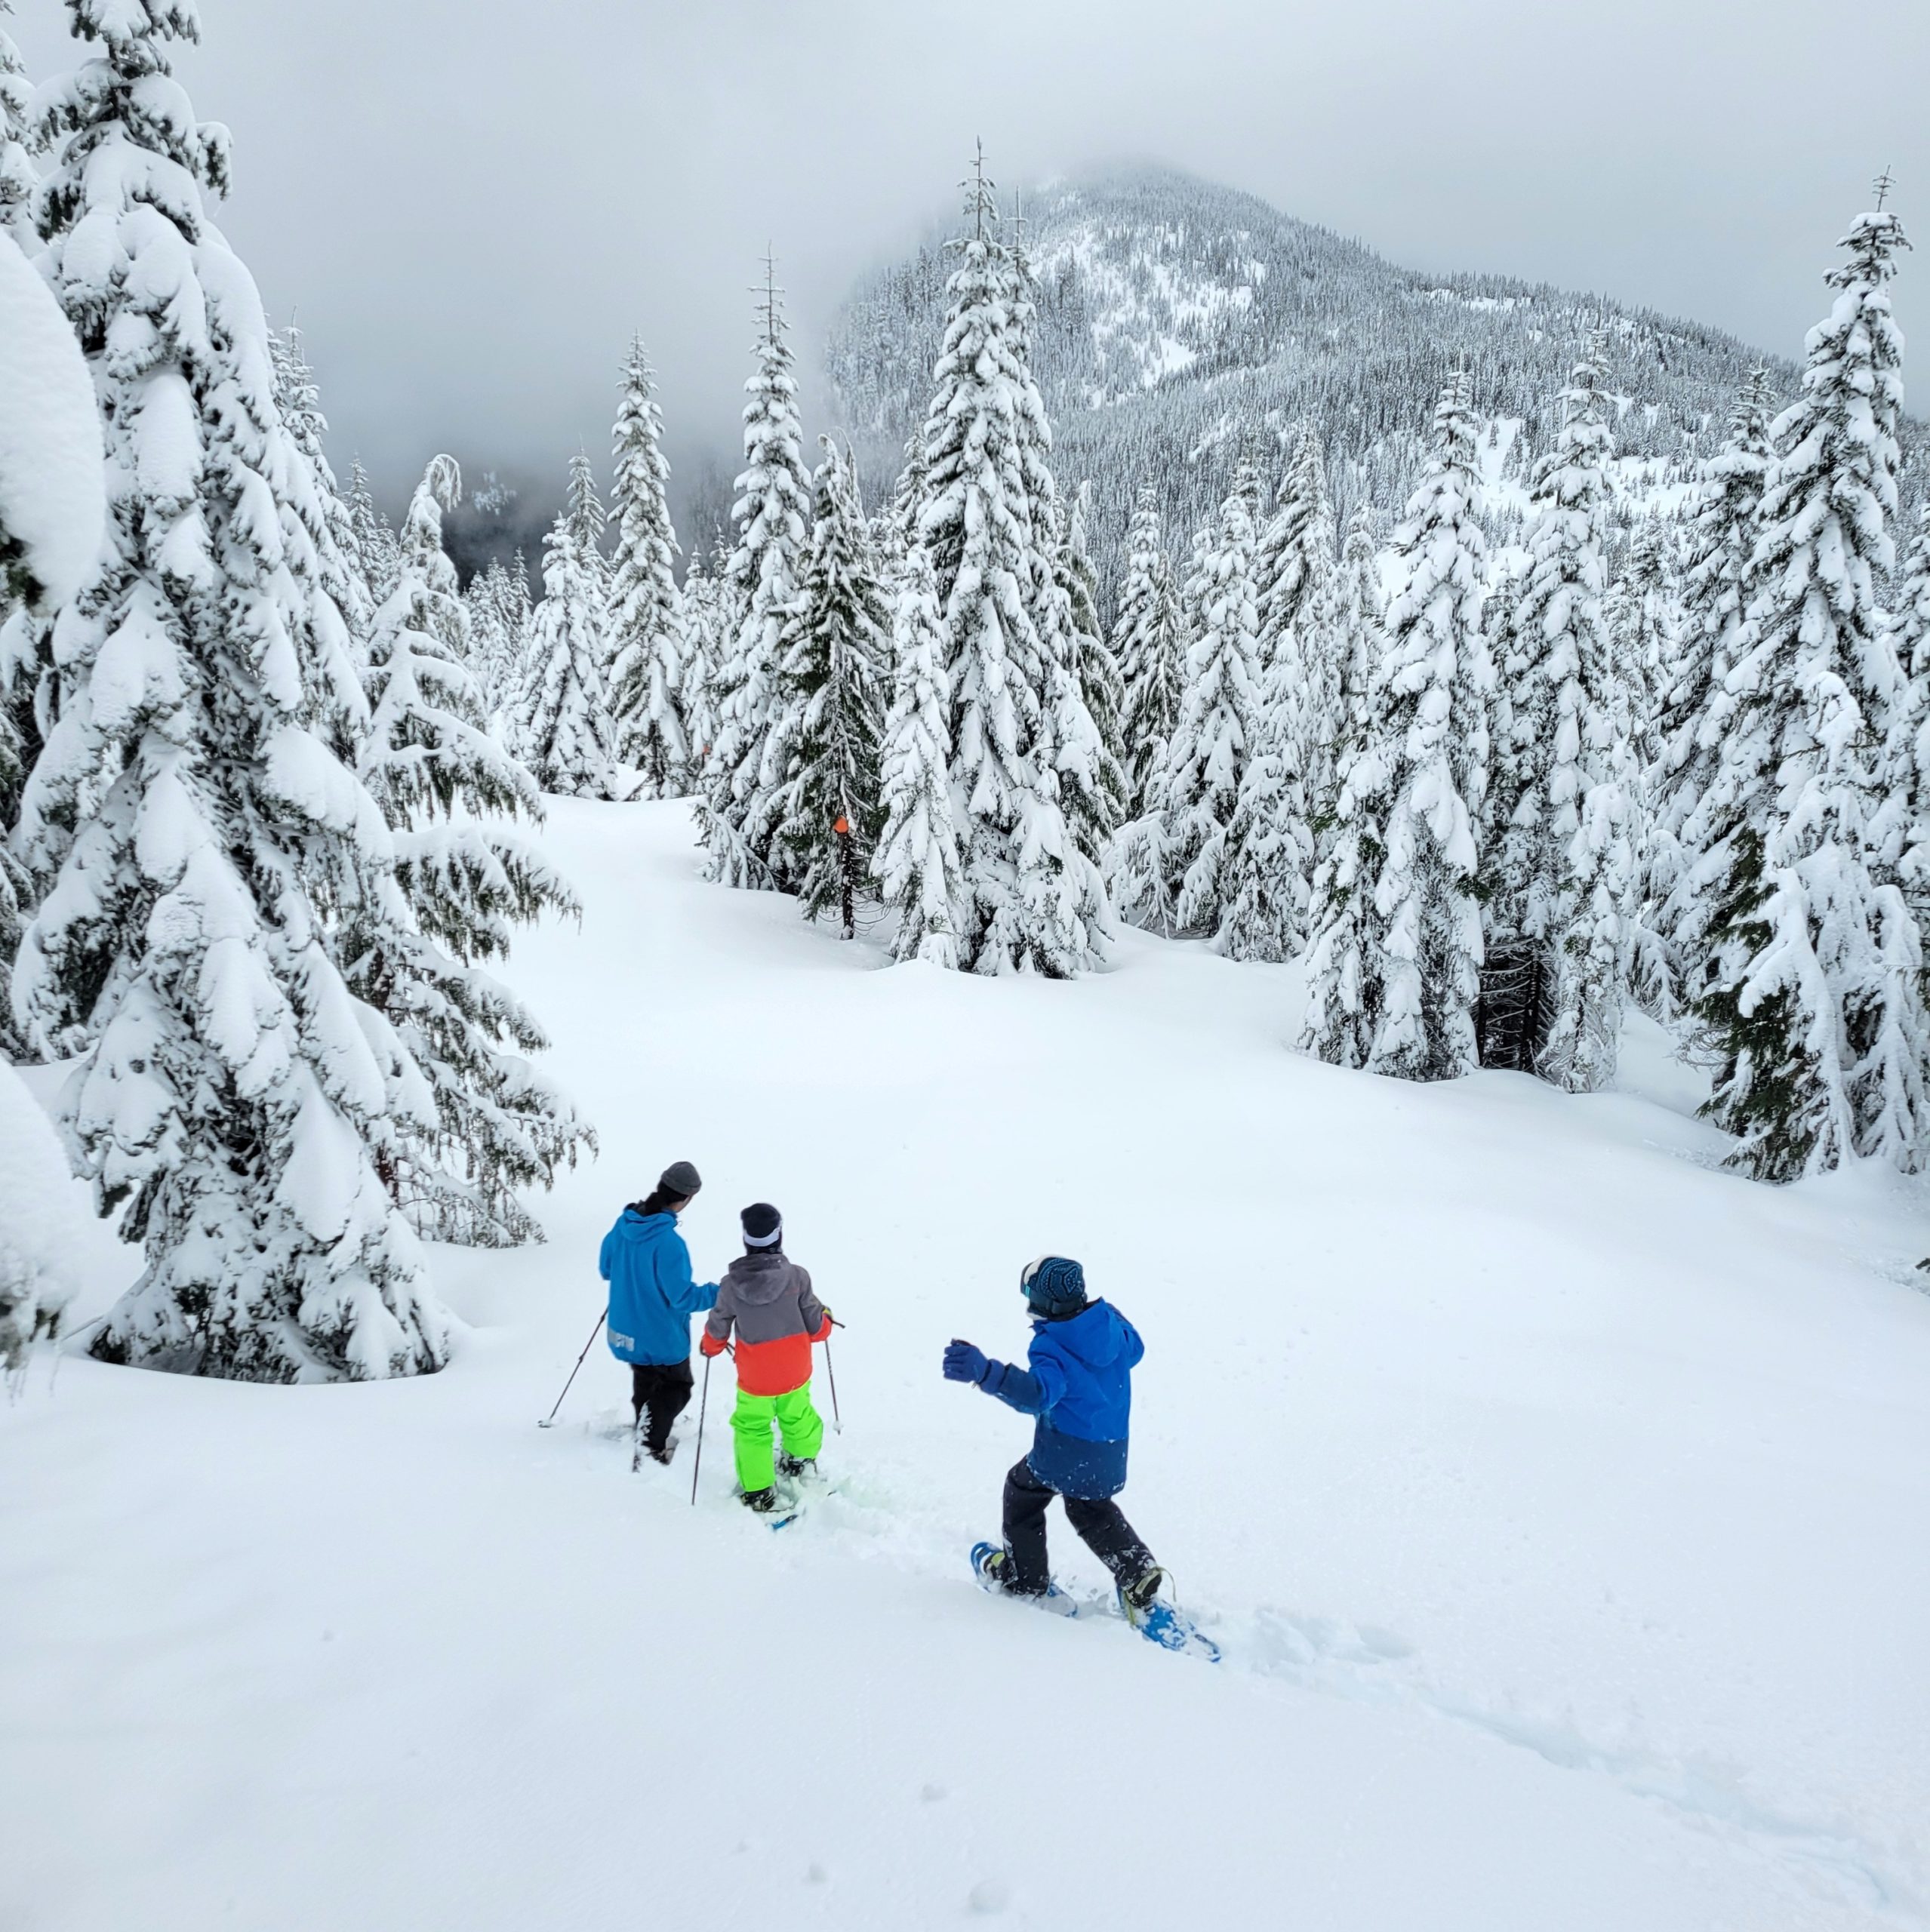 Sasquatch Mountain Snowshoeing - Guided Treks and New Snowshoe Trails